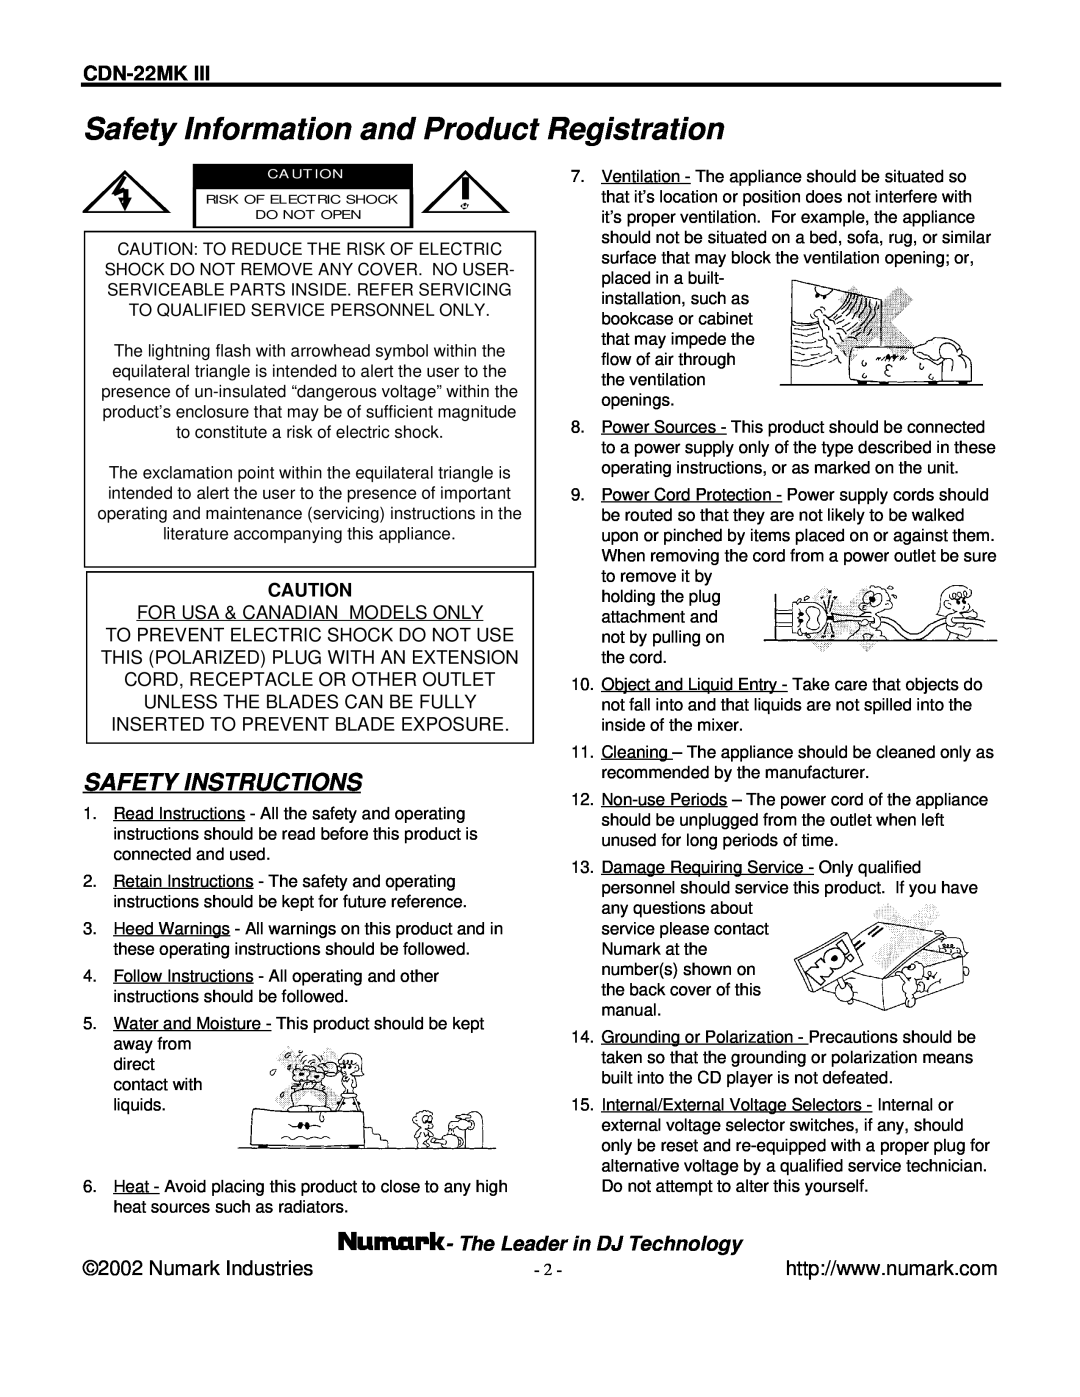 Numark Industries CDN-22MK III manual Safety Information and Product Registration, Safety Instructions, CDN-22MKIII 